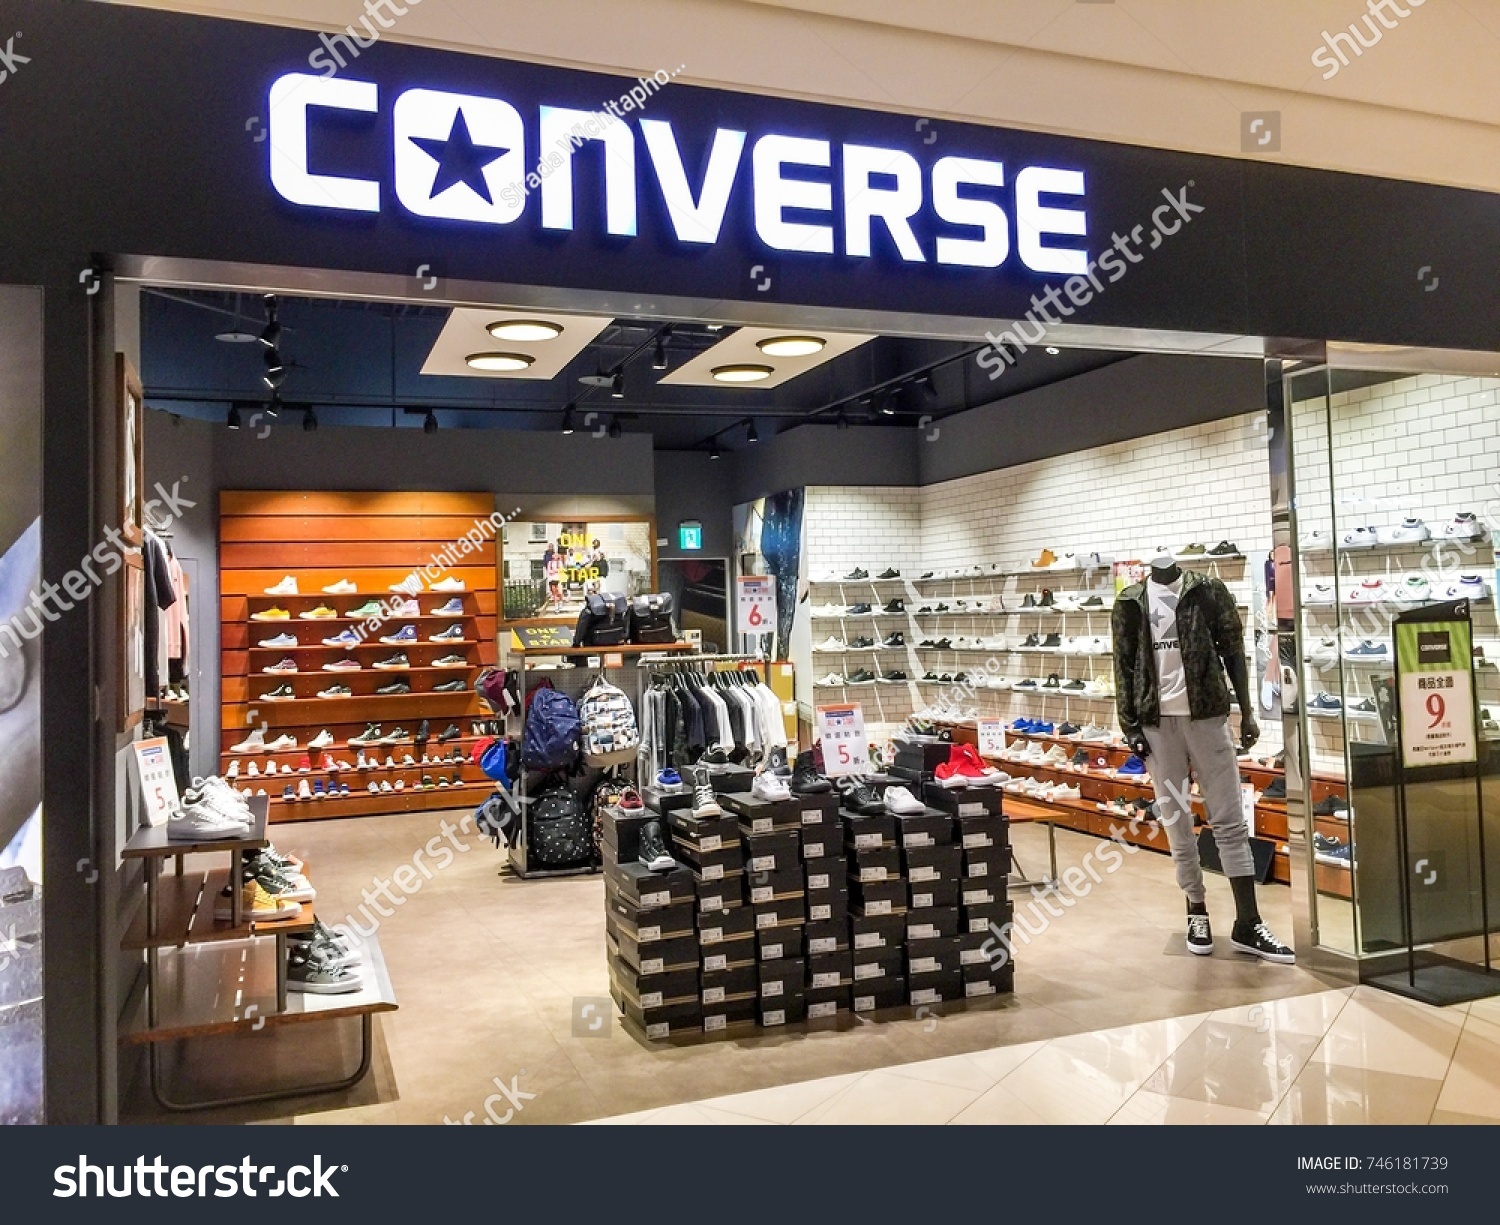 converse outlet mall